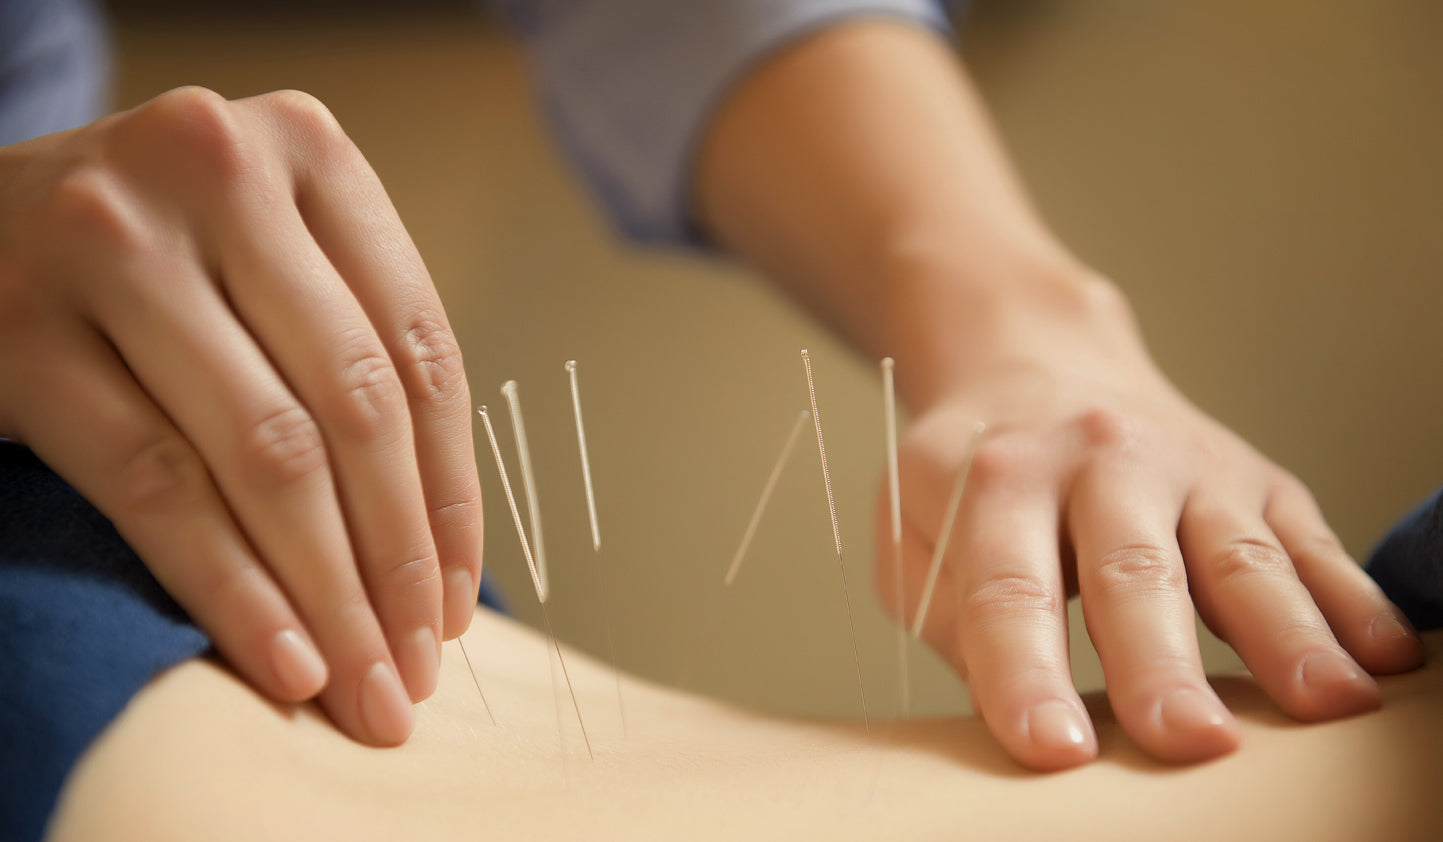 shop acupuncture needles at lierre.ca